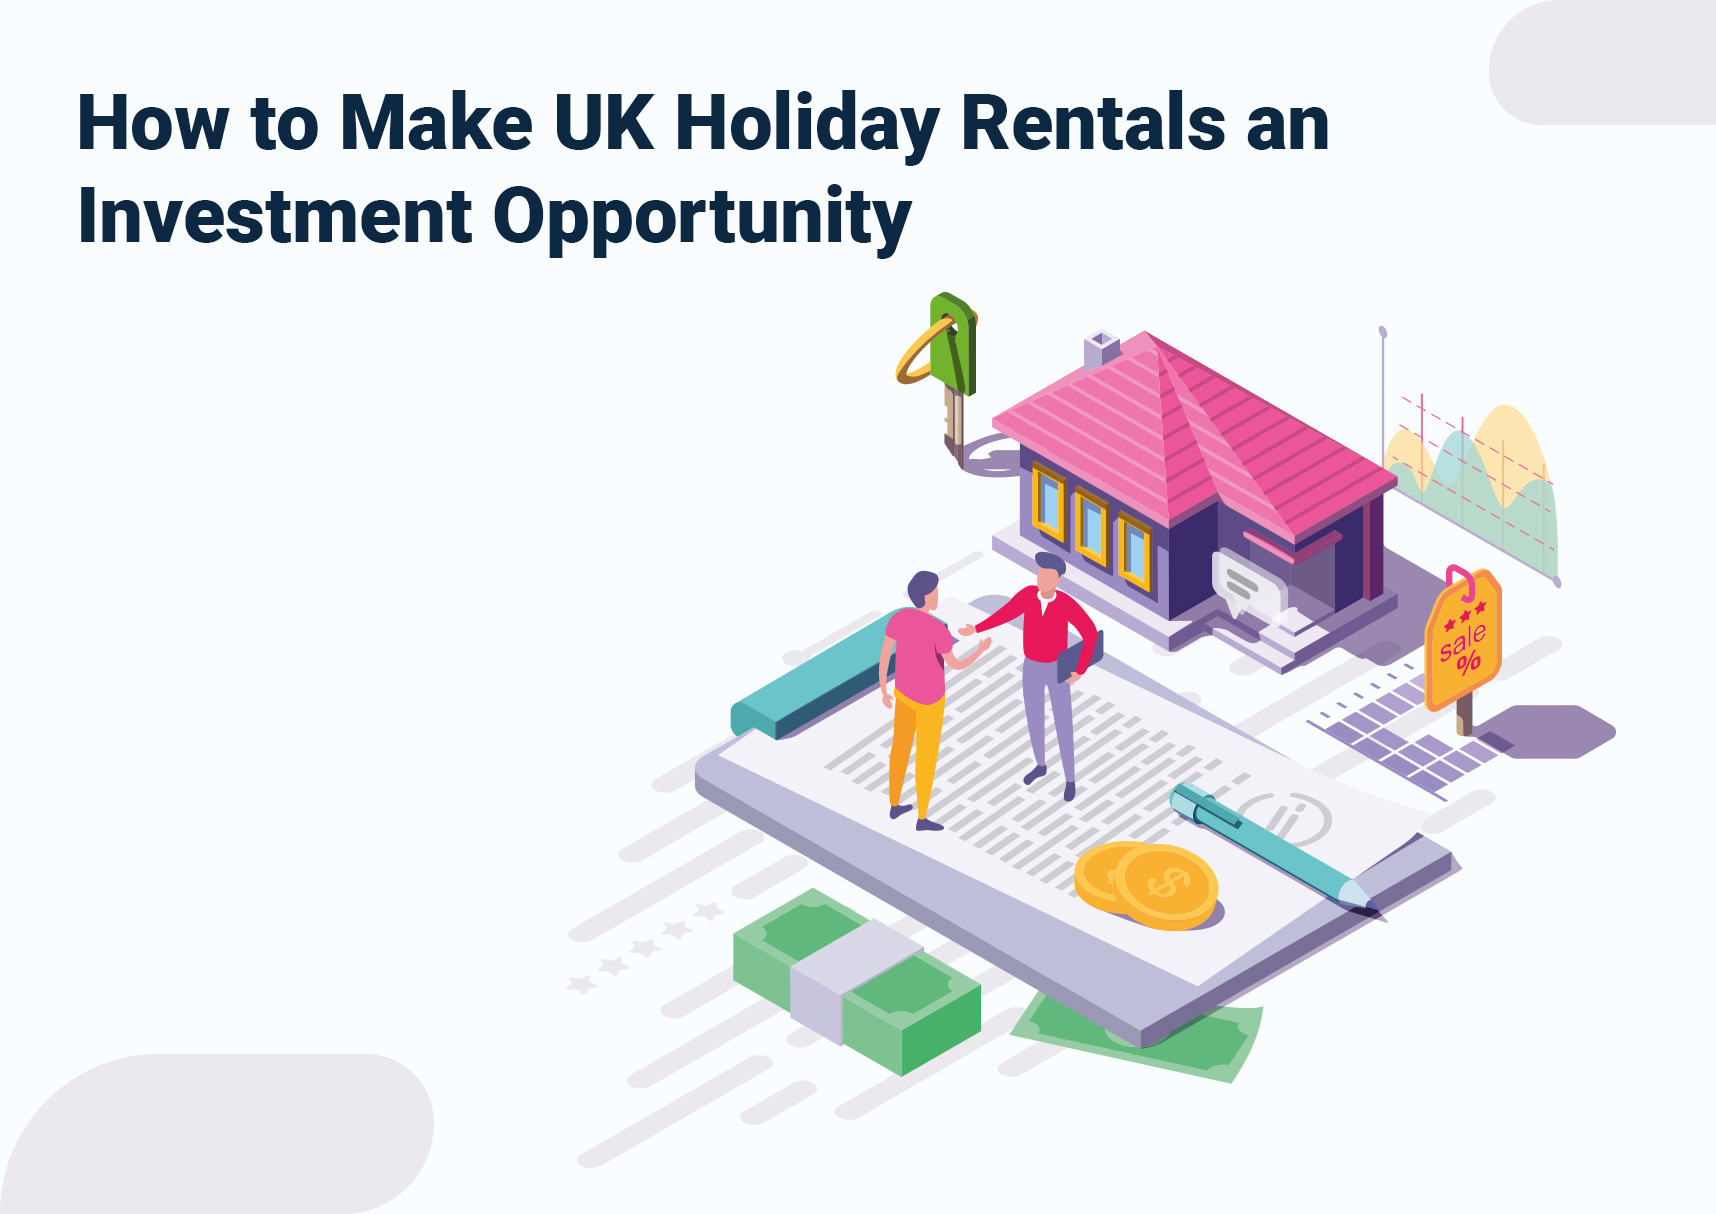 How to Make UK Holiday Rentals an Investment Opportunity